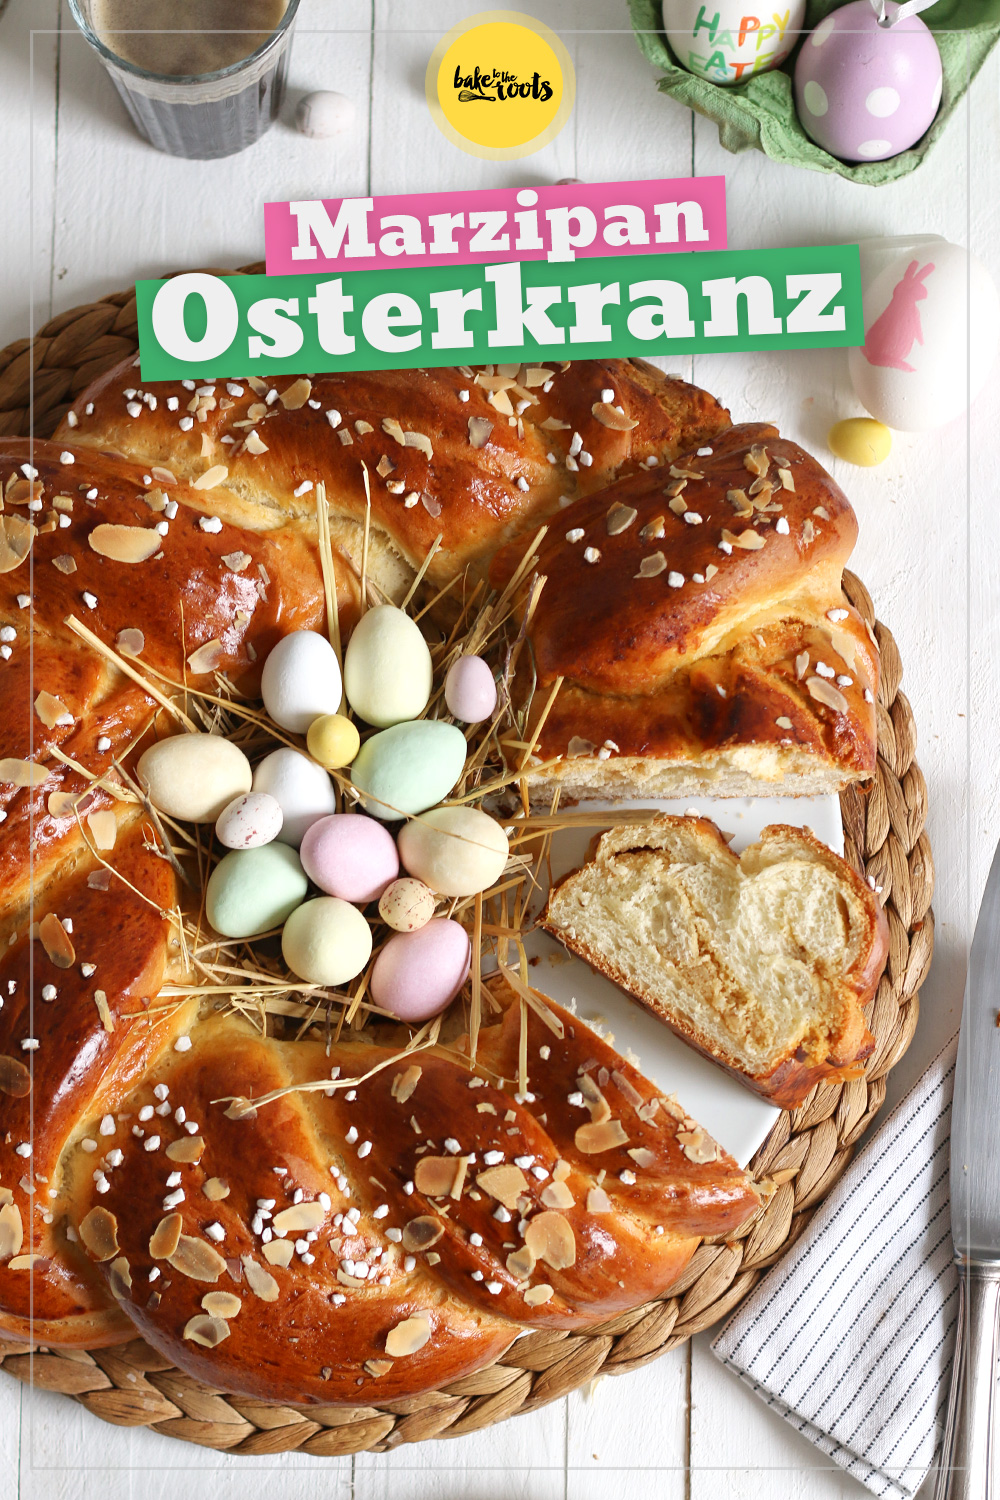 Marzipan Oster Hefekranz | Bake to the roots